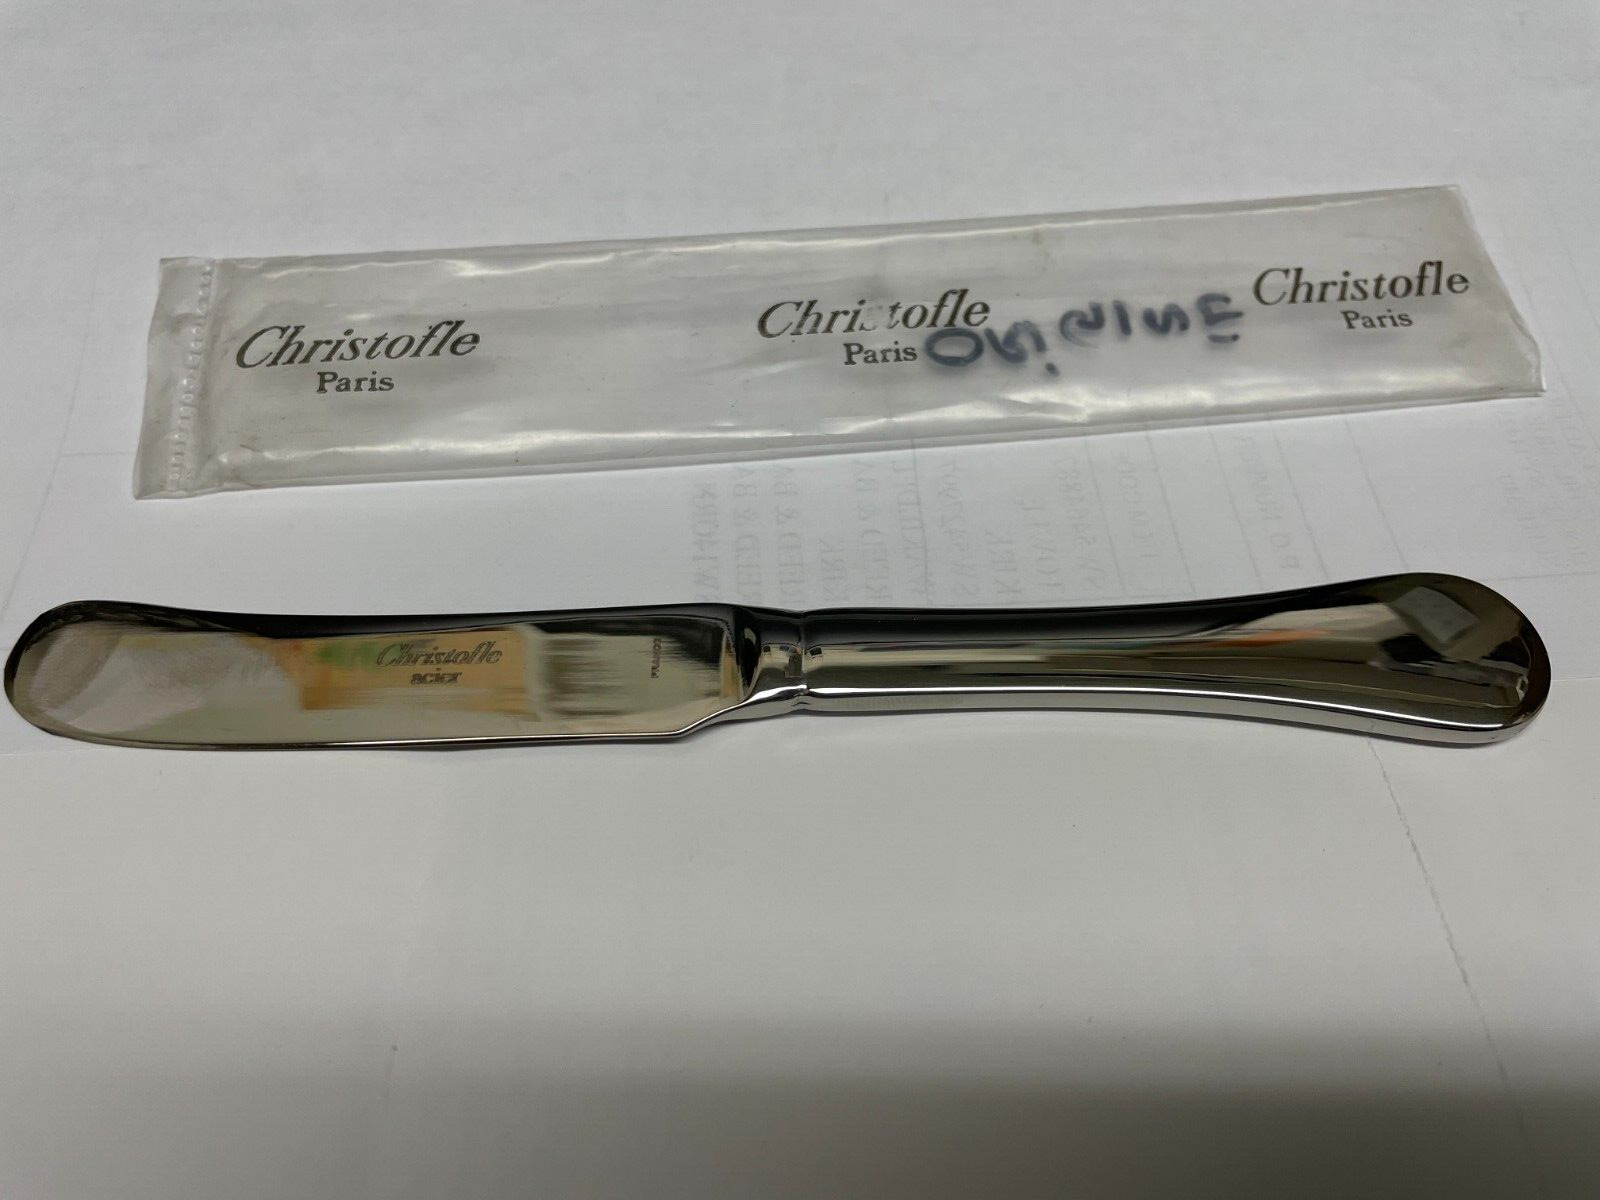 NEW CHRISTOFLE ORIGINE STAINLESS HH Butter spreaders Shiny